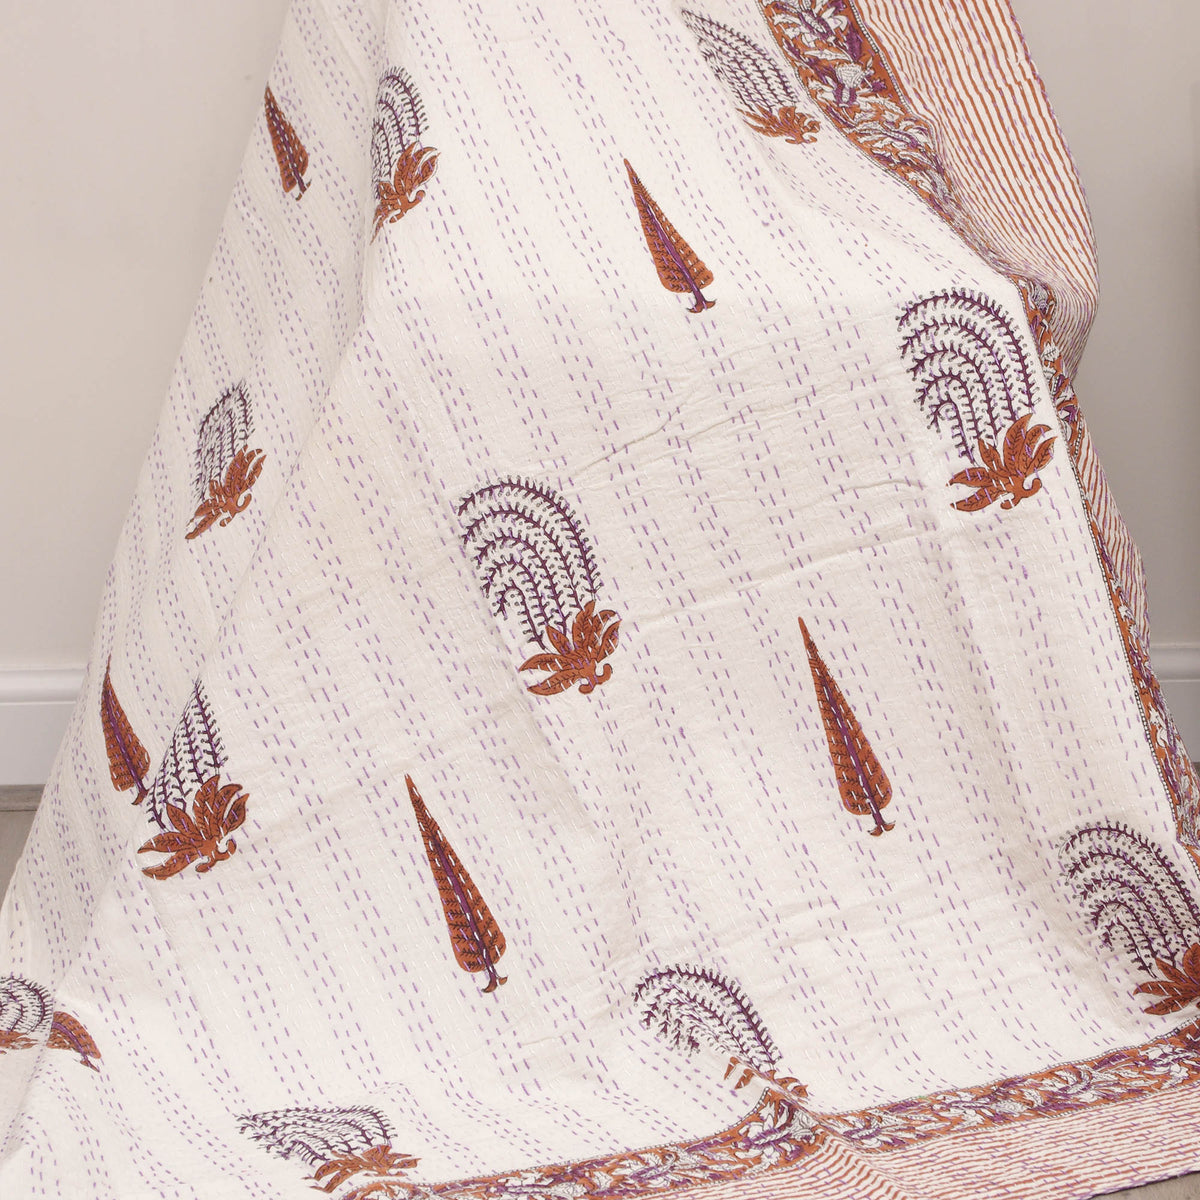 Block Printed With Brown & White Foliage Cypress Tree Cotton Queen Indian Kantha Quilt Bedspread